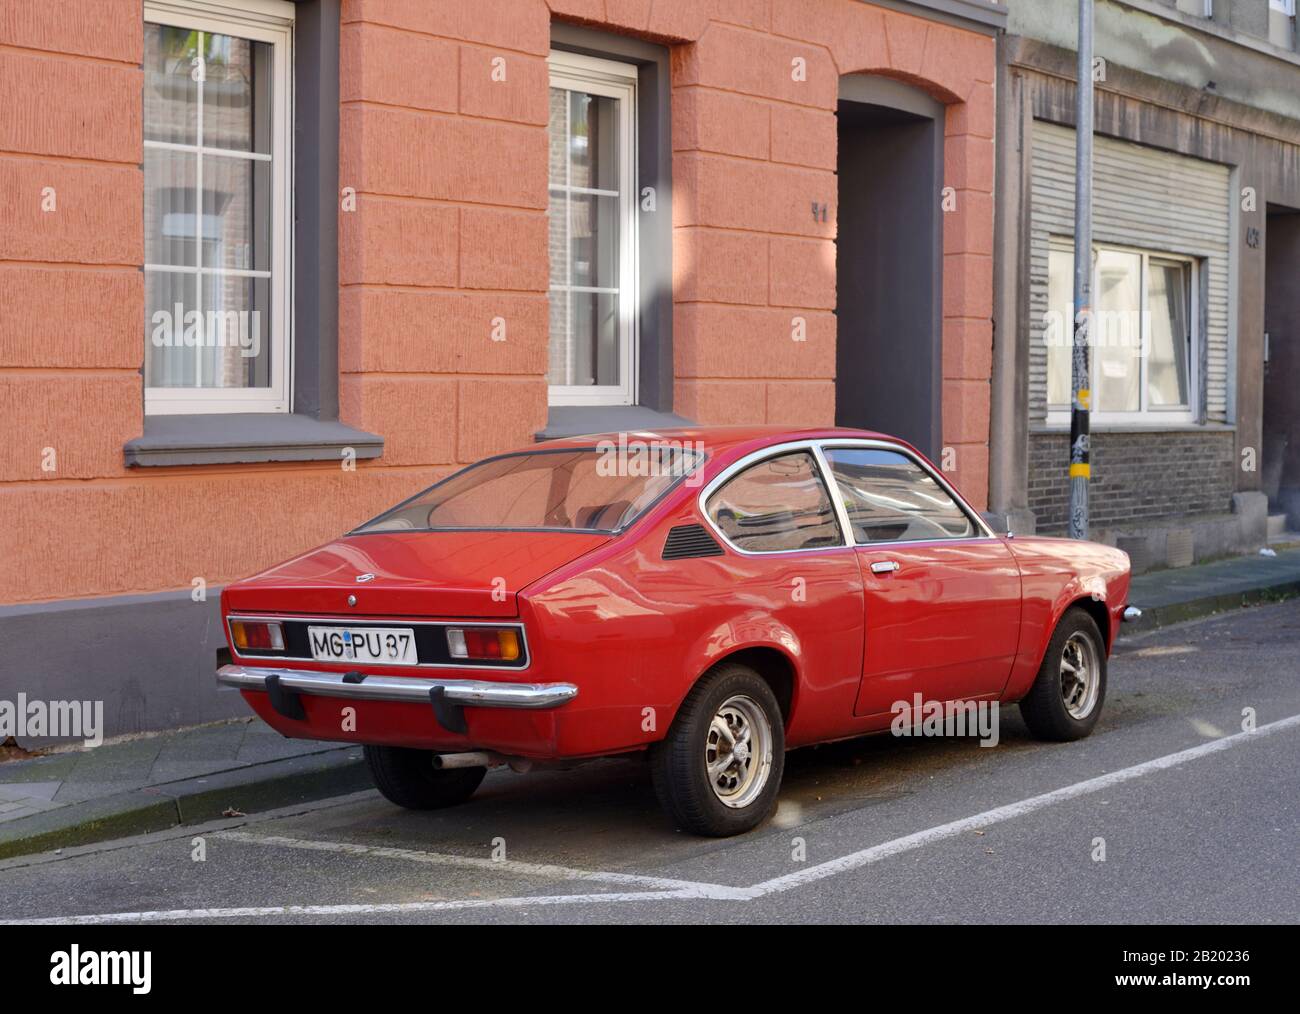 Red classic german Opel car in the street Stock Photo - Alamy